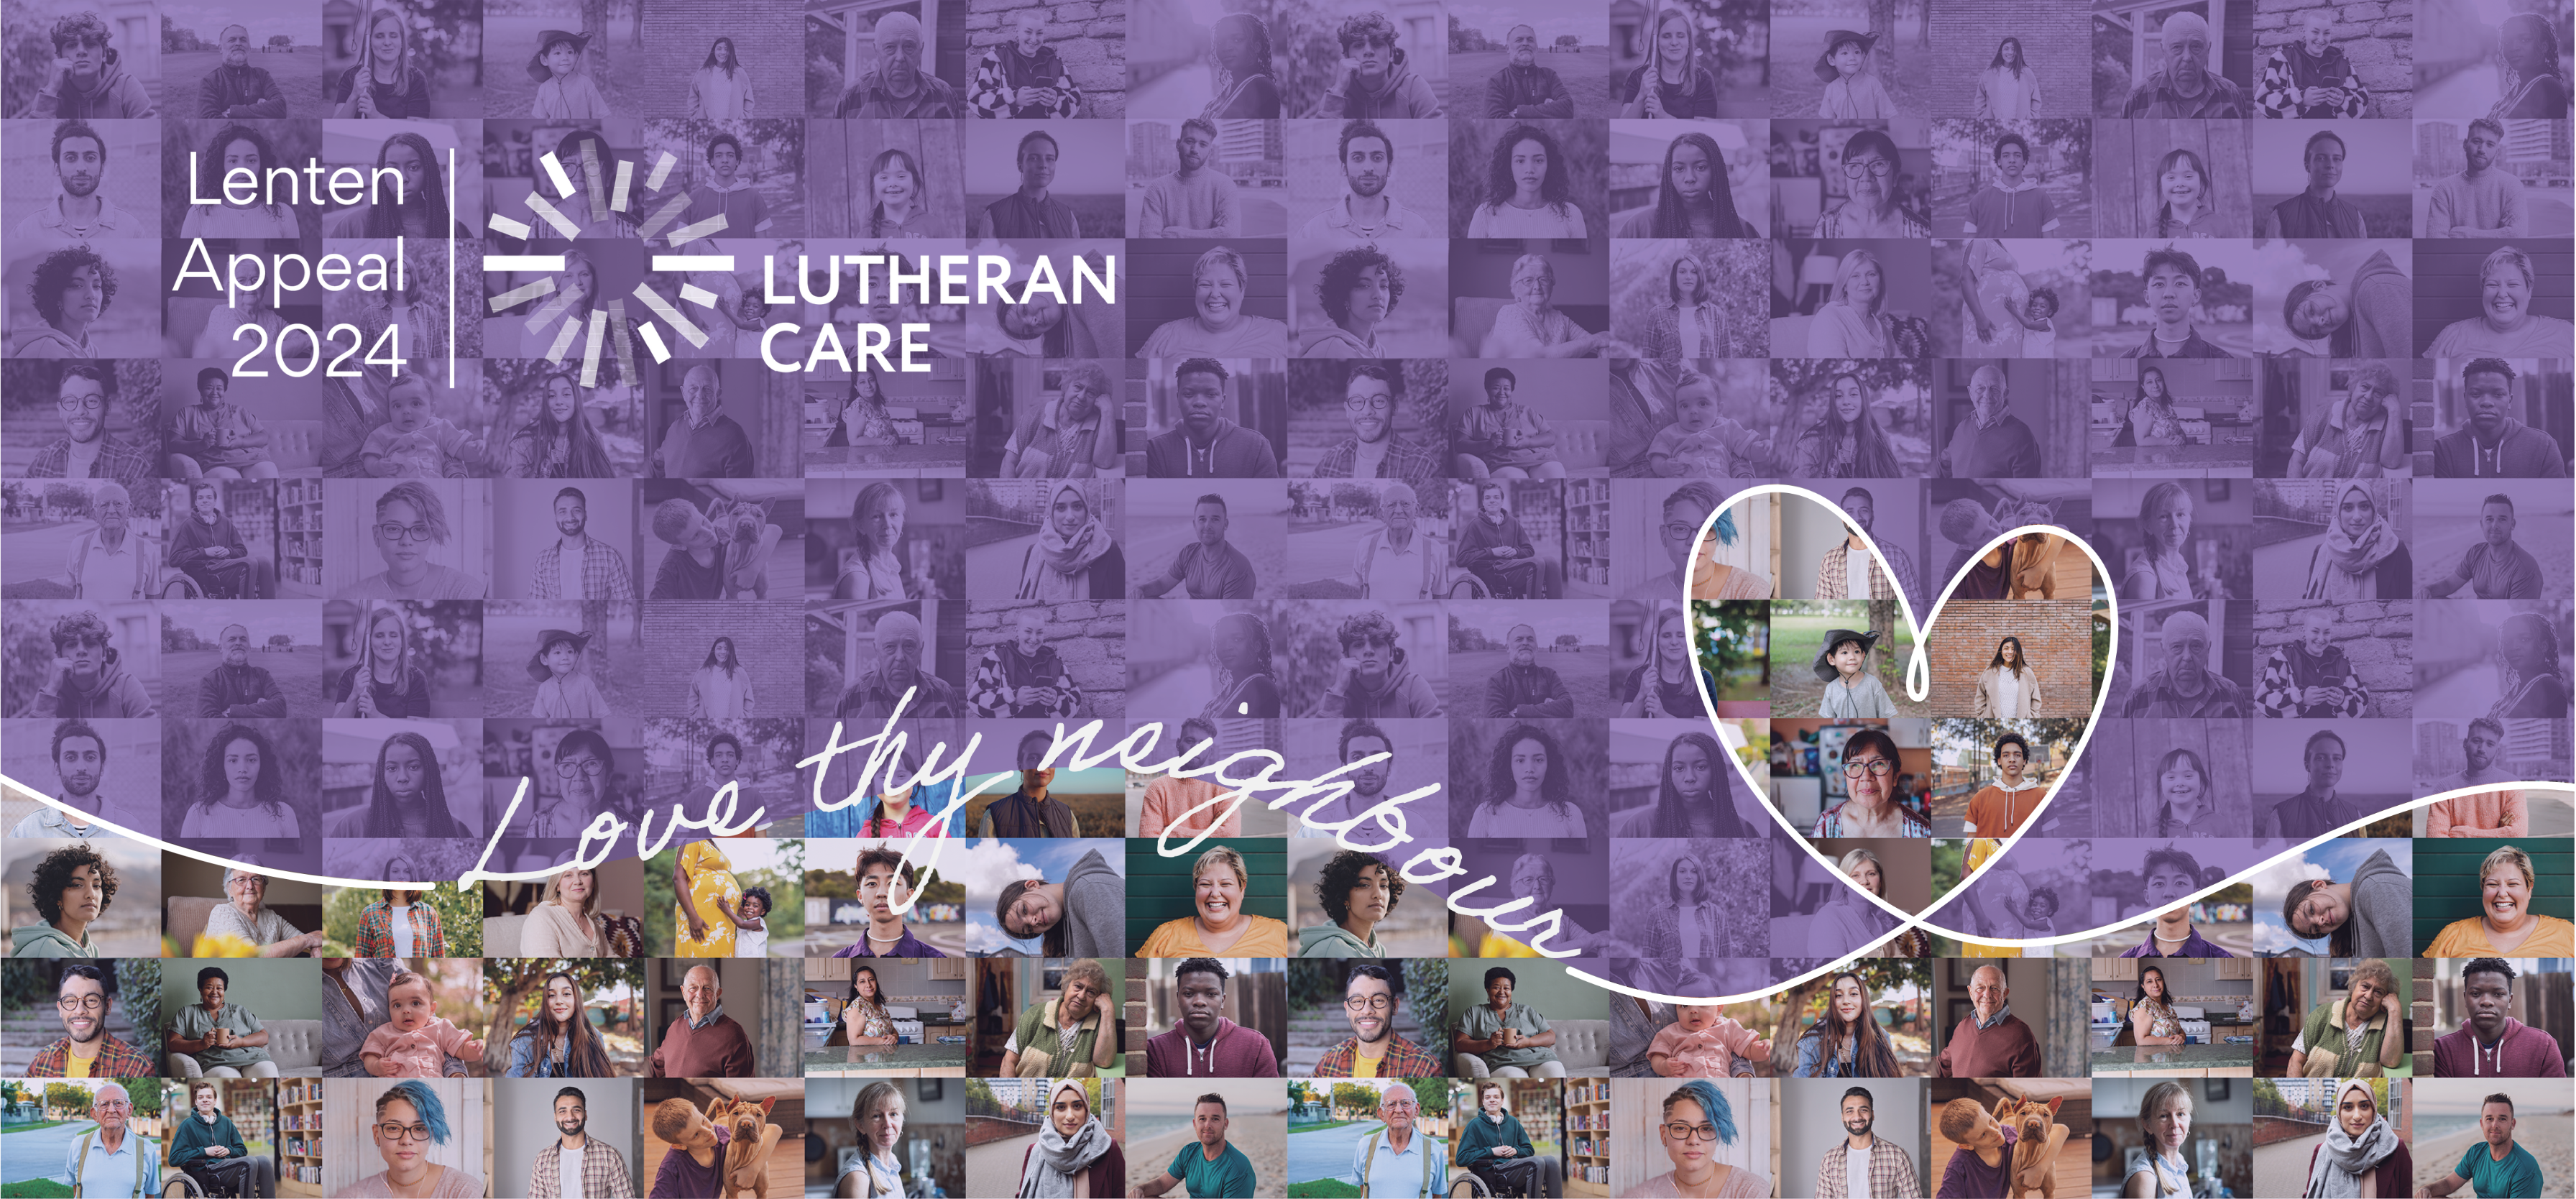 Image full of lots of people from different walks of life. Text says 'Love Thy Neighbour' and Lutheran Care Lenten Appeal 2024.